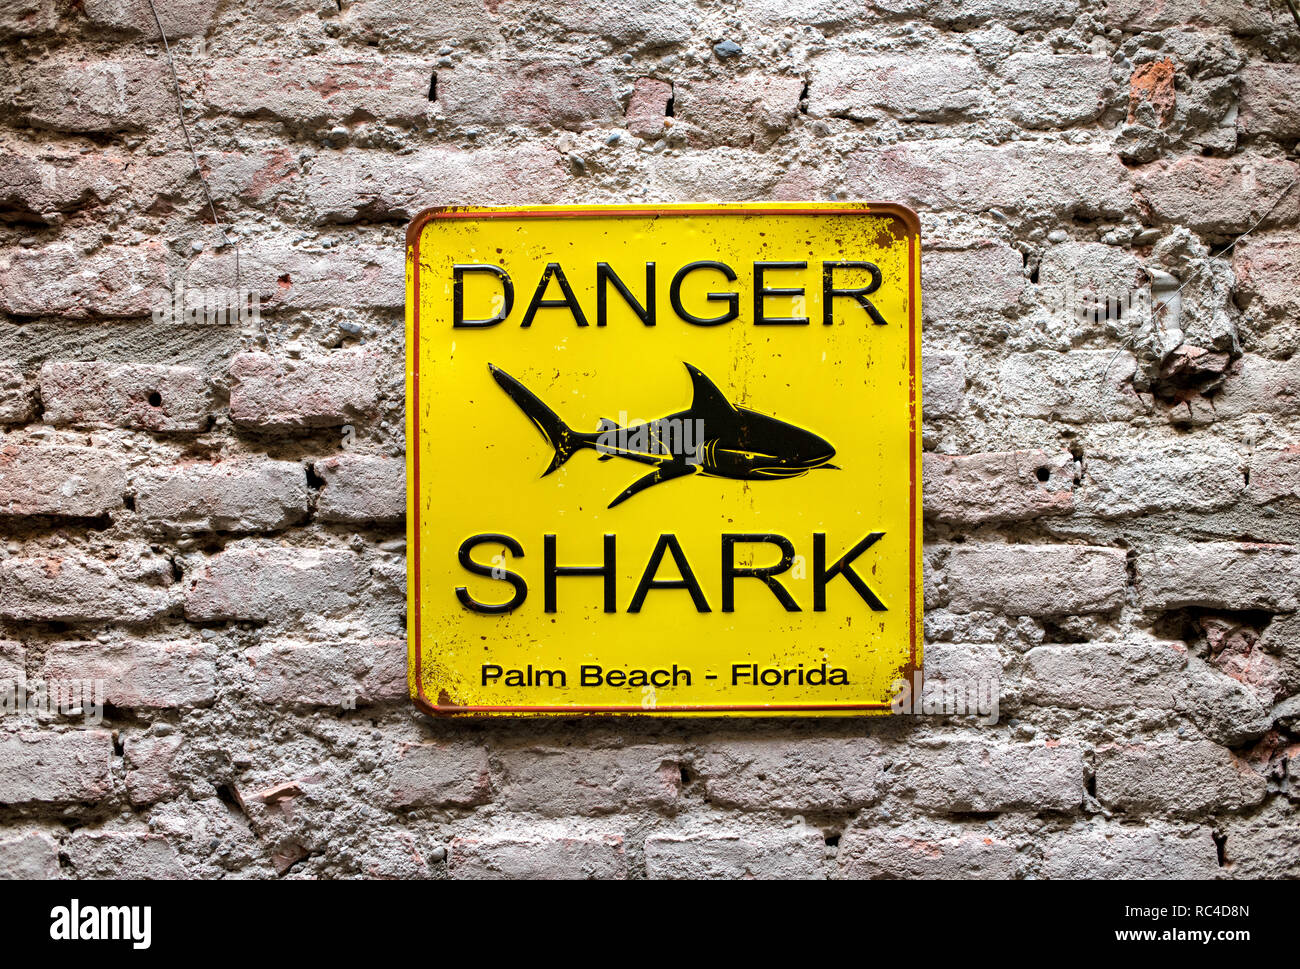 Yellow square metal Danger Shark sign with black shark silhouette image viewed in close-up and full frame on old brick wall. Palm Beach, Florida Stock Photo